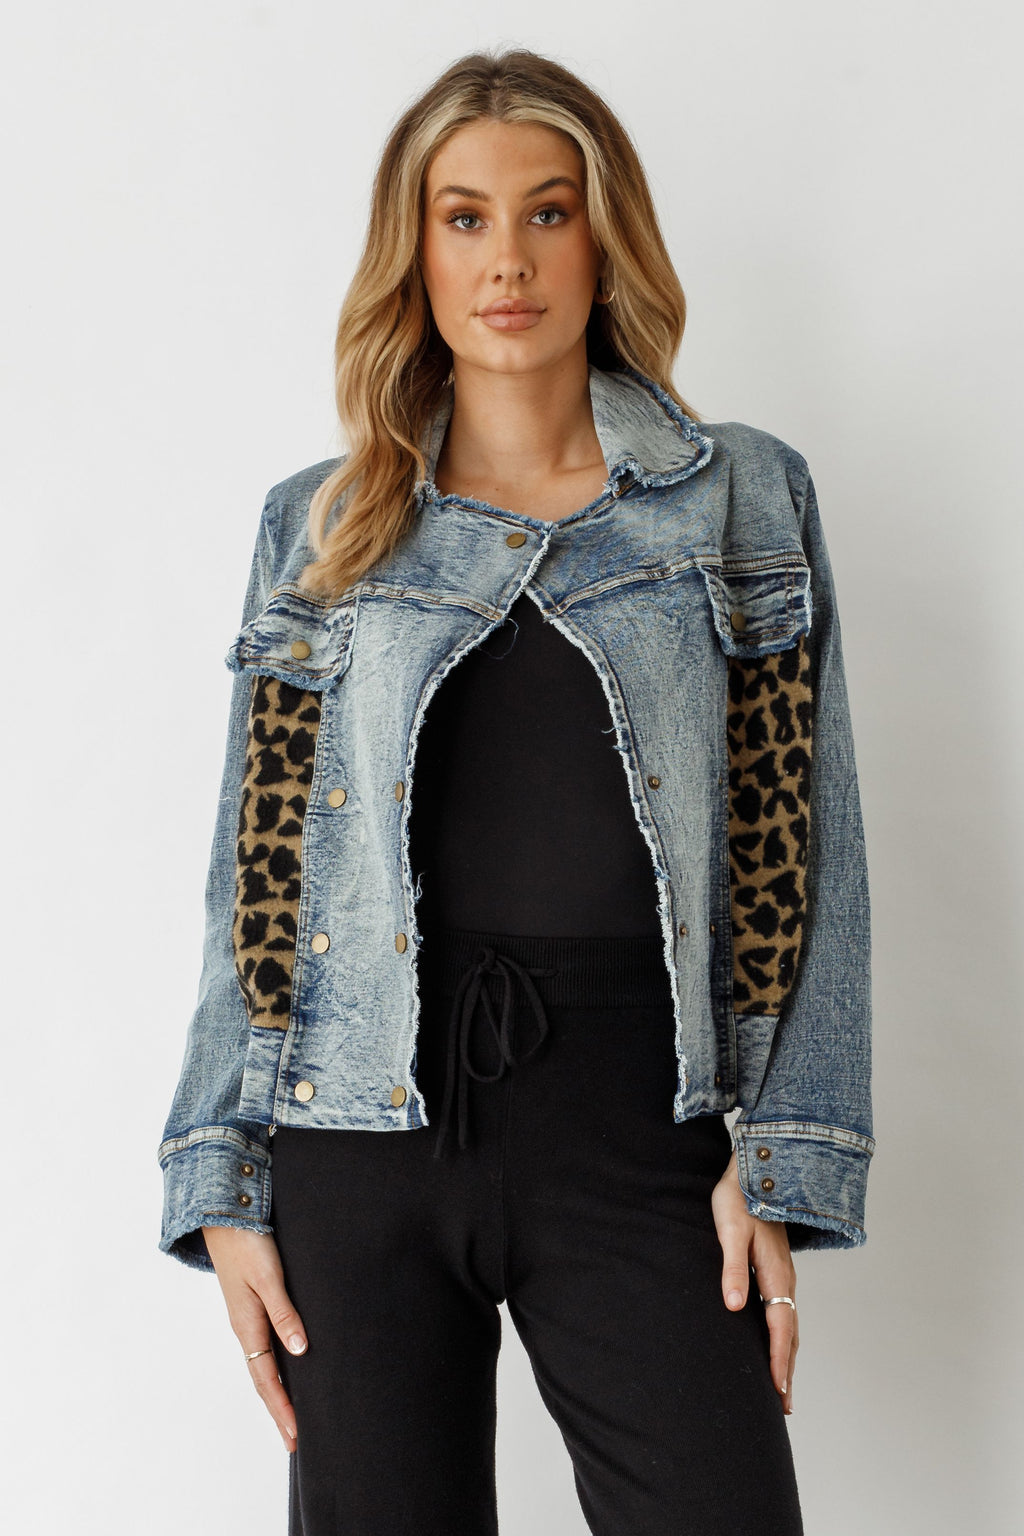 Holmes and Fallon Denim Jacket with Leopard Panels